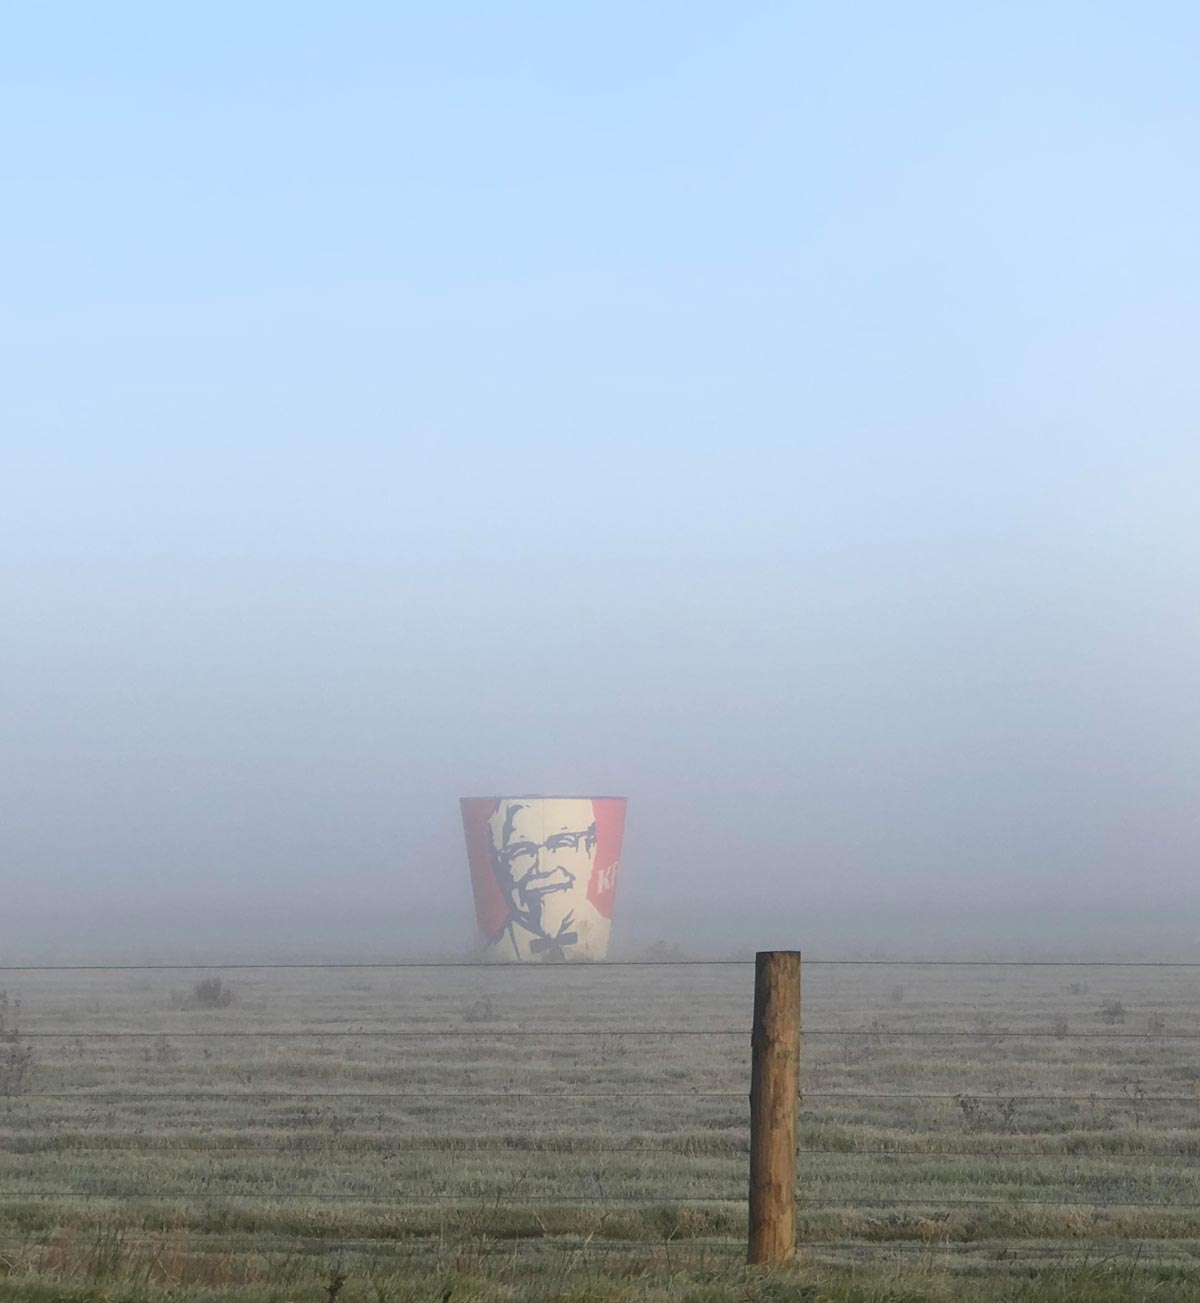 Local KFC got pulled down a few years back, owner kept the old bucket and put it on his property near the highway. It was foggy a few days ago and was able to capture this